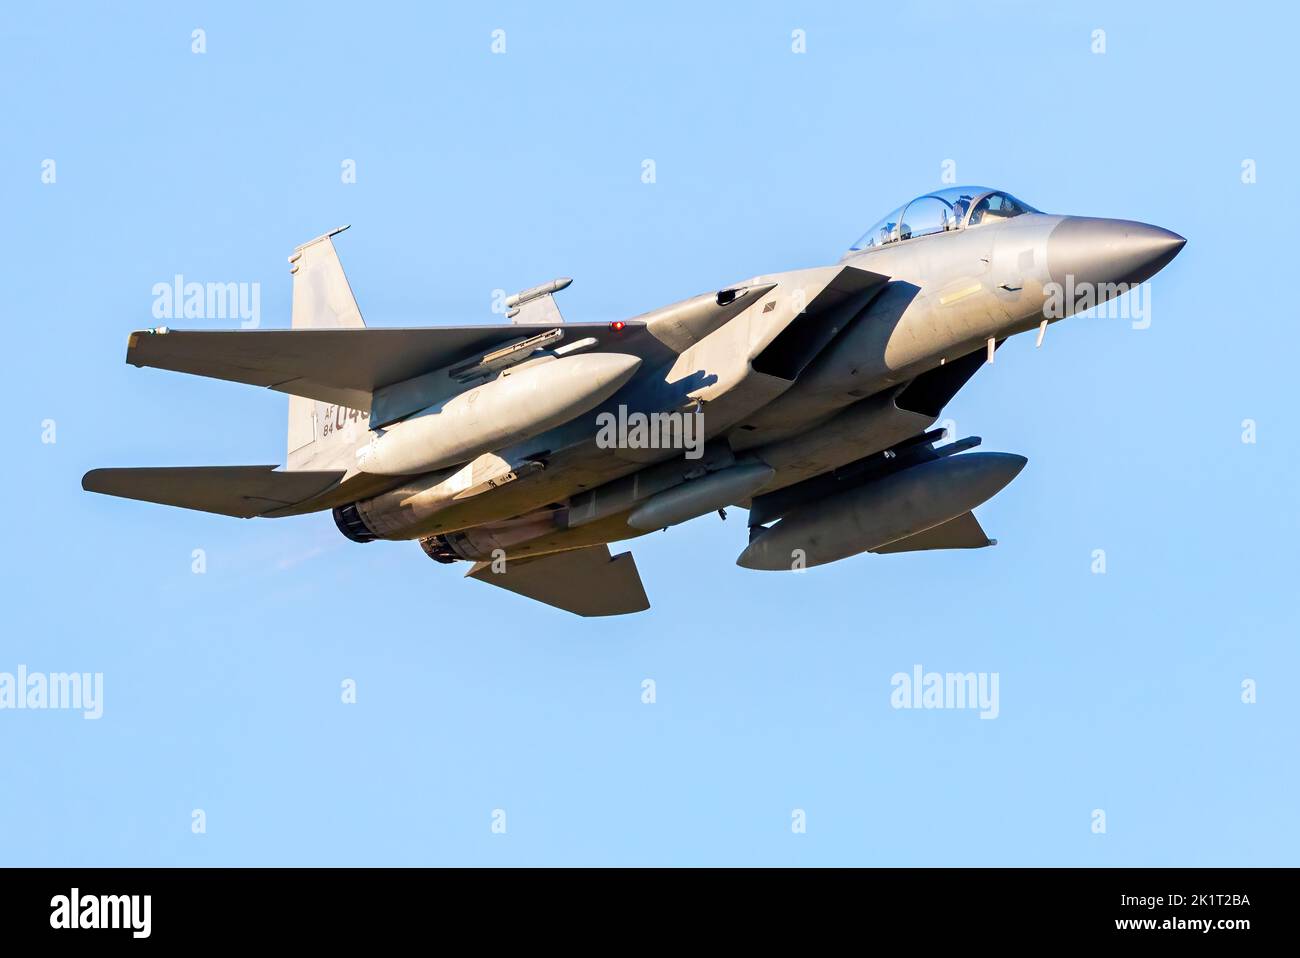 An United Sates F-15 Strike Eagle jet fighter aircraft at 2022 Airshow London SkyDrive, Ontario, Canada. Stock Photo